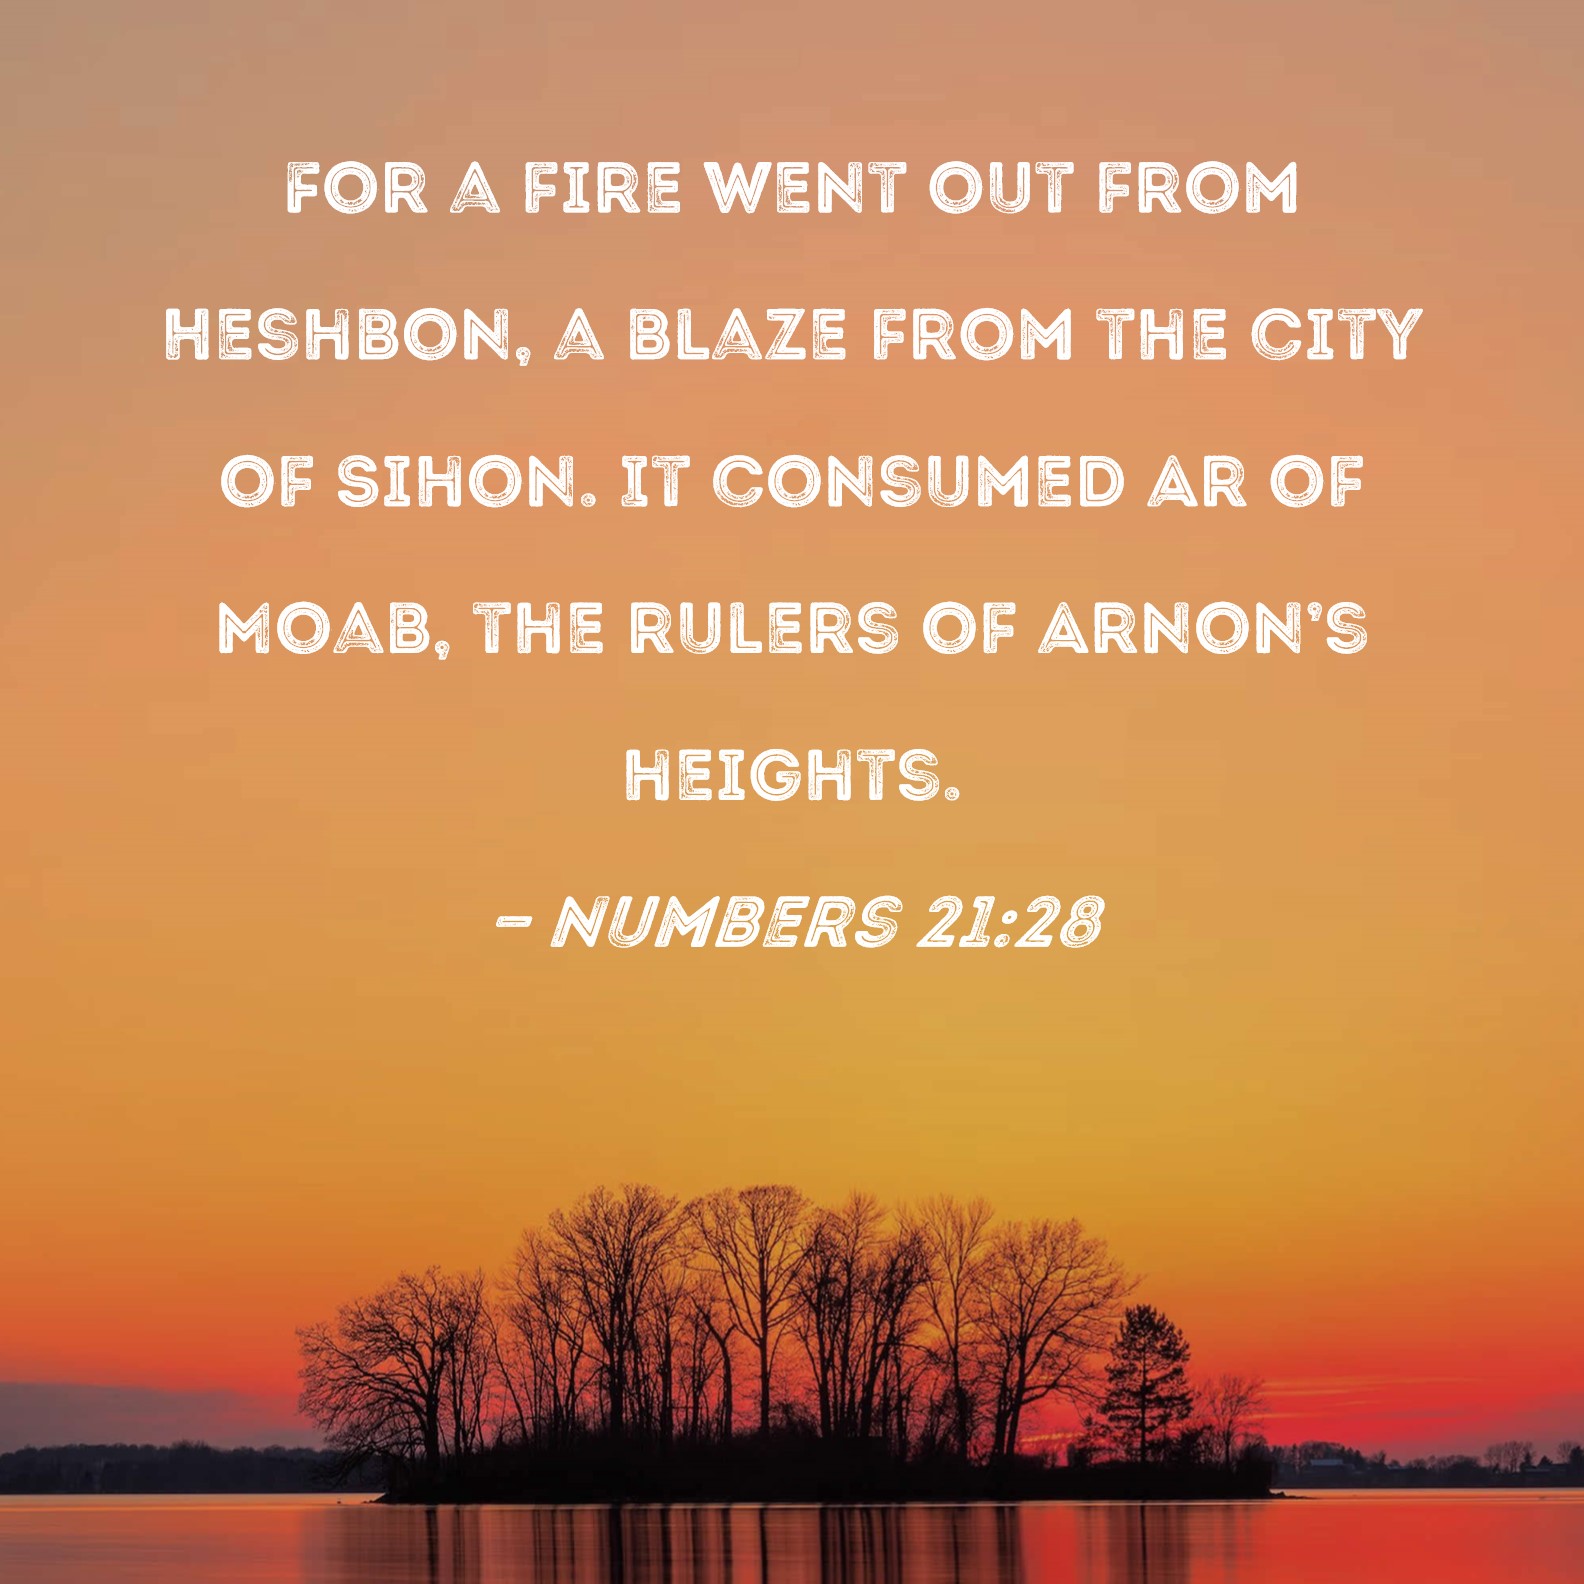 numbers-21-28-for-a-fire-went-out-from-heshbon-a-blaze-from-the-city-of-sihon-it-consumed-ar